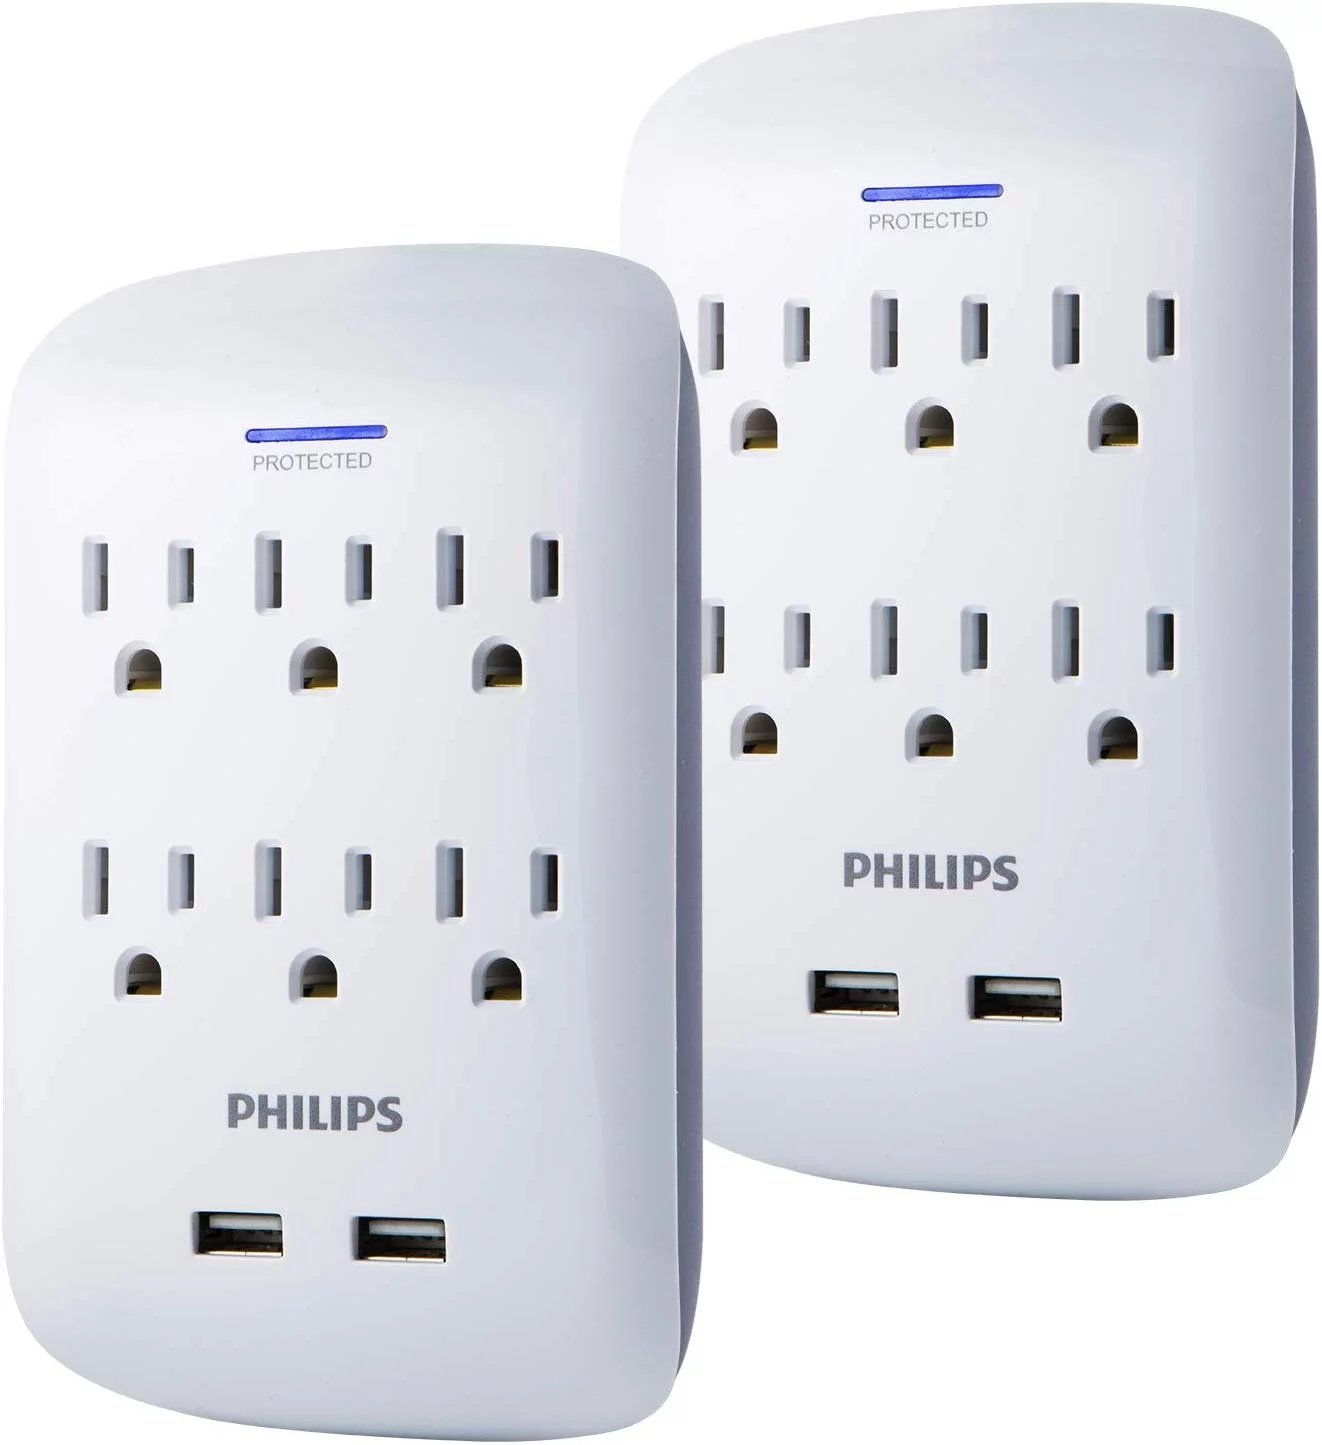 Philips Surge Protector with USB Charging, 2 Pack, 6 Outlet, 2 USB Charging Ports, Wall Adapter, White